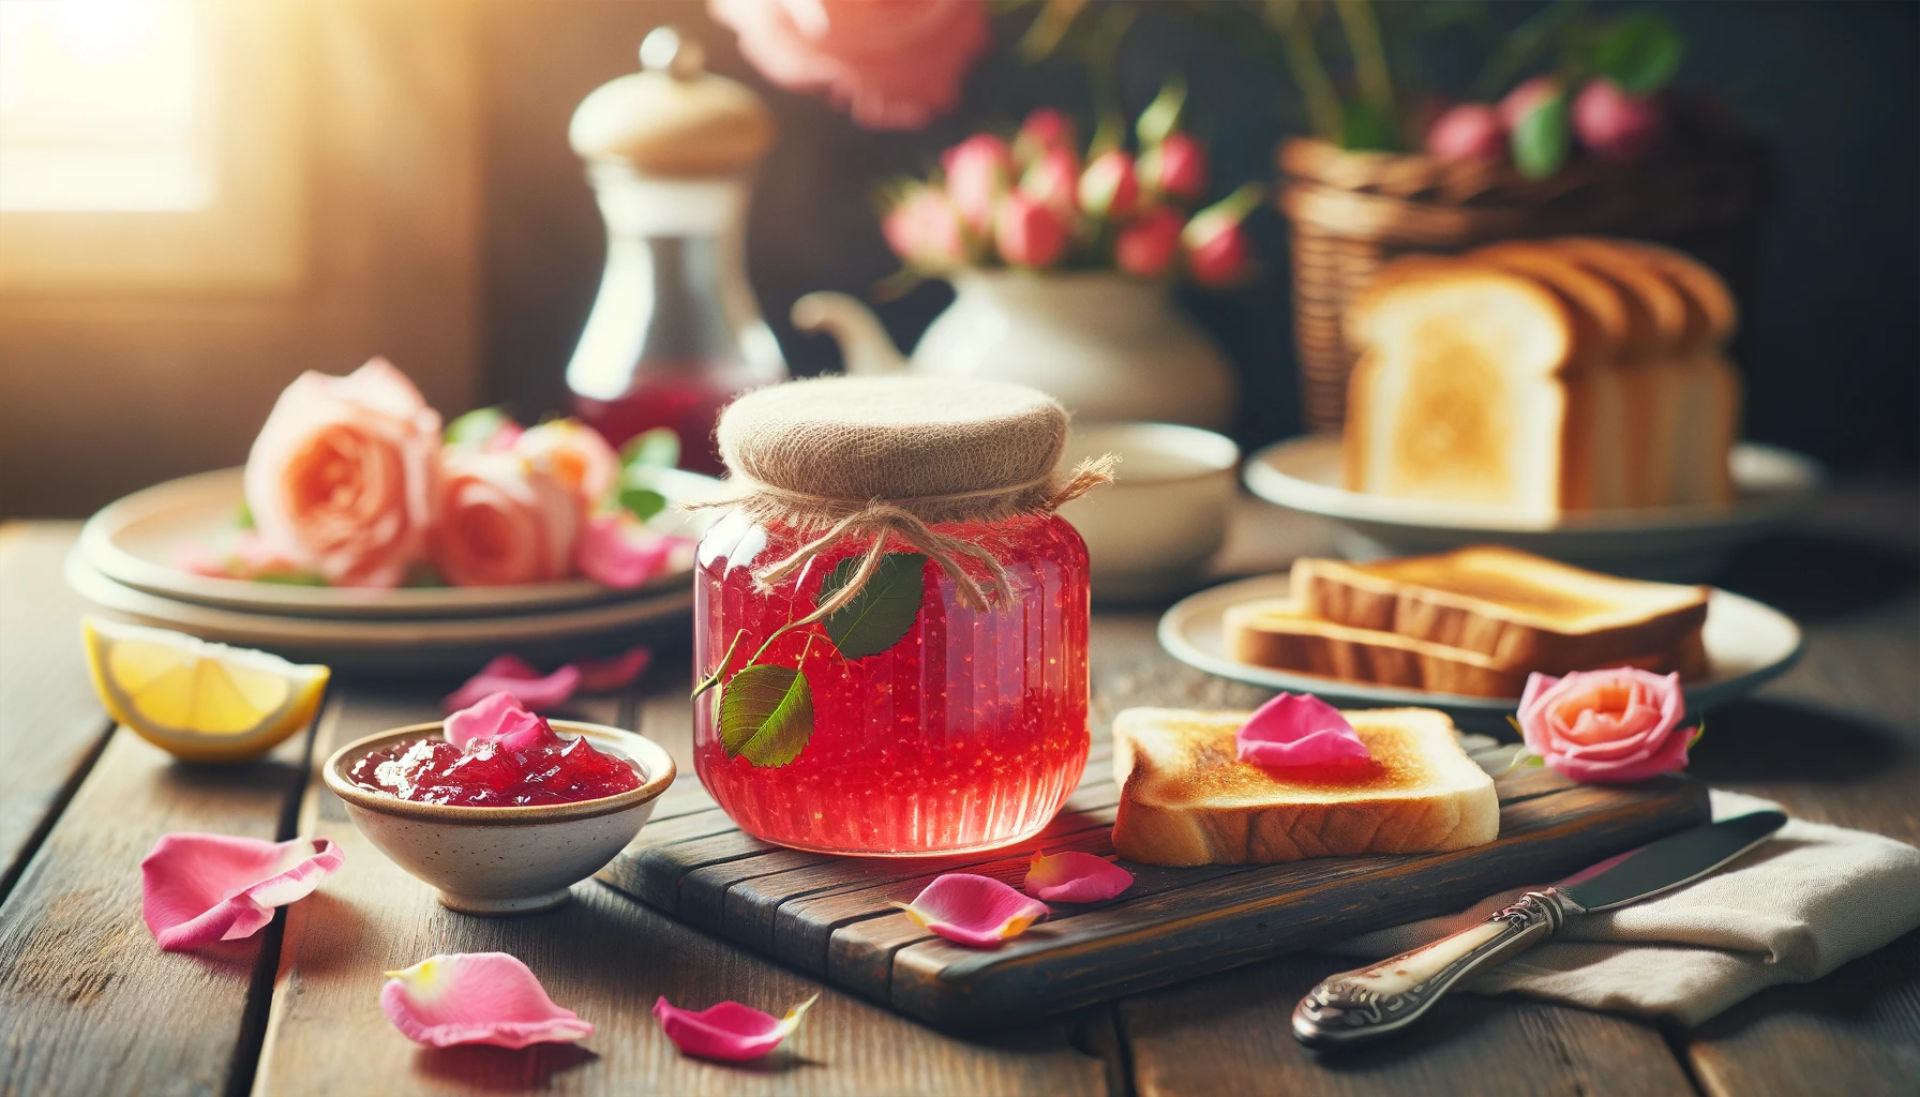 A breakfast setting with a jar of homemade rose petal jam. The jam has a vibrant pink colour and is served in a glass jar with a rustic lid. Beside the jar, there's a plate of freshly toasted bread, a small bowl of lemon wedges, and a few scattered rose petals on a wooden table. The background is softly blurred, creating a cozy, morning ambiance. The lighting is warm and gentle, reminiscent of a serene morning. 